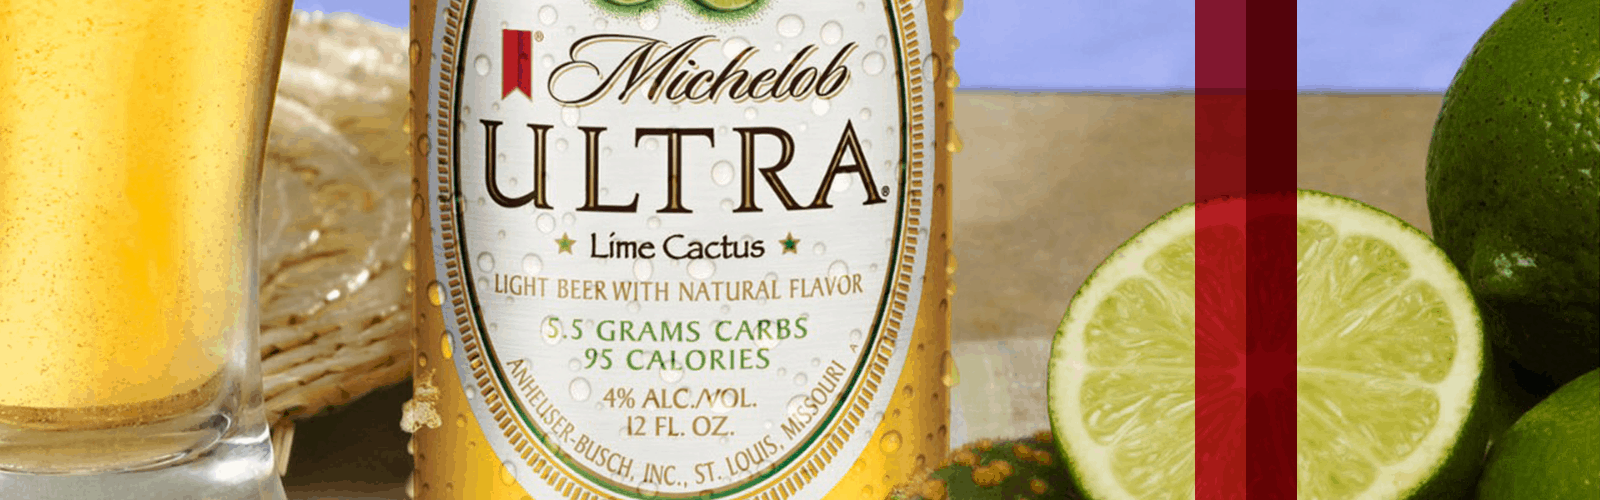 Michelob Ultra Lime Cactus - light beer